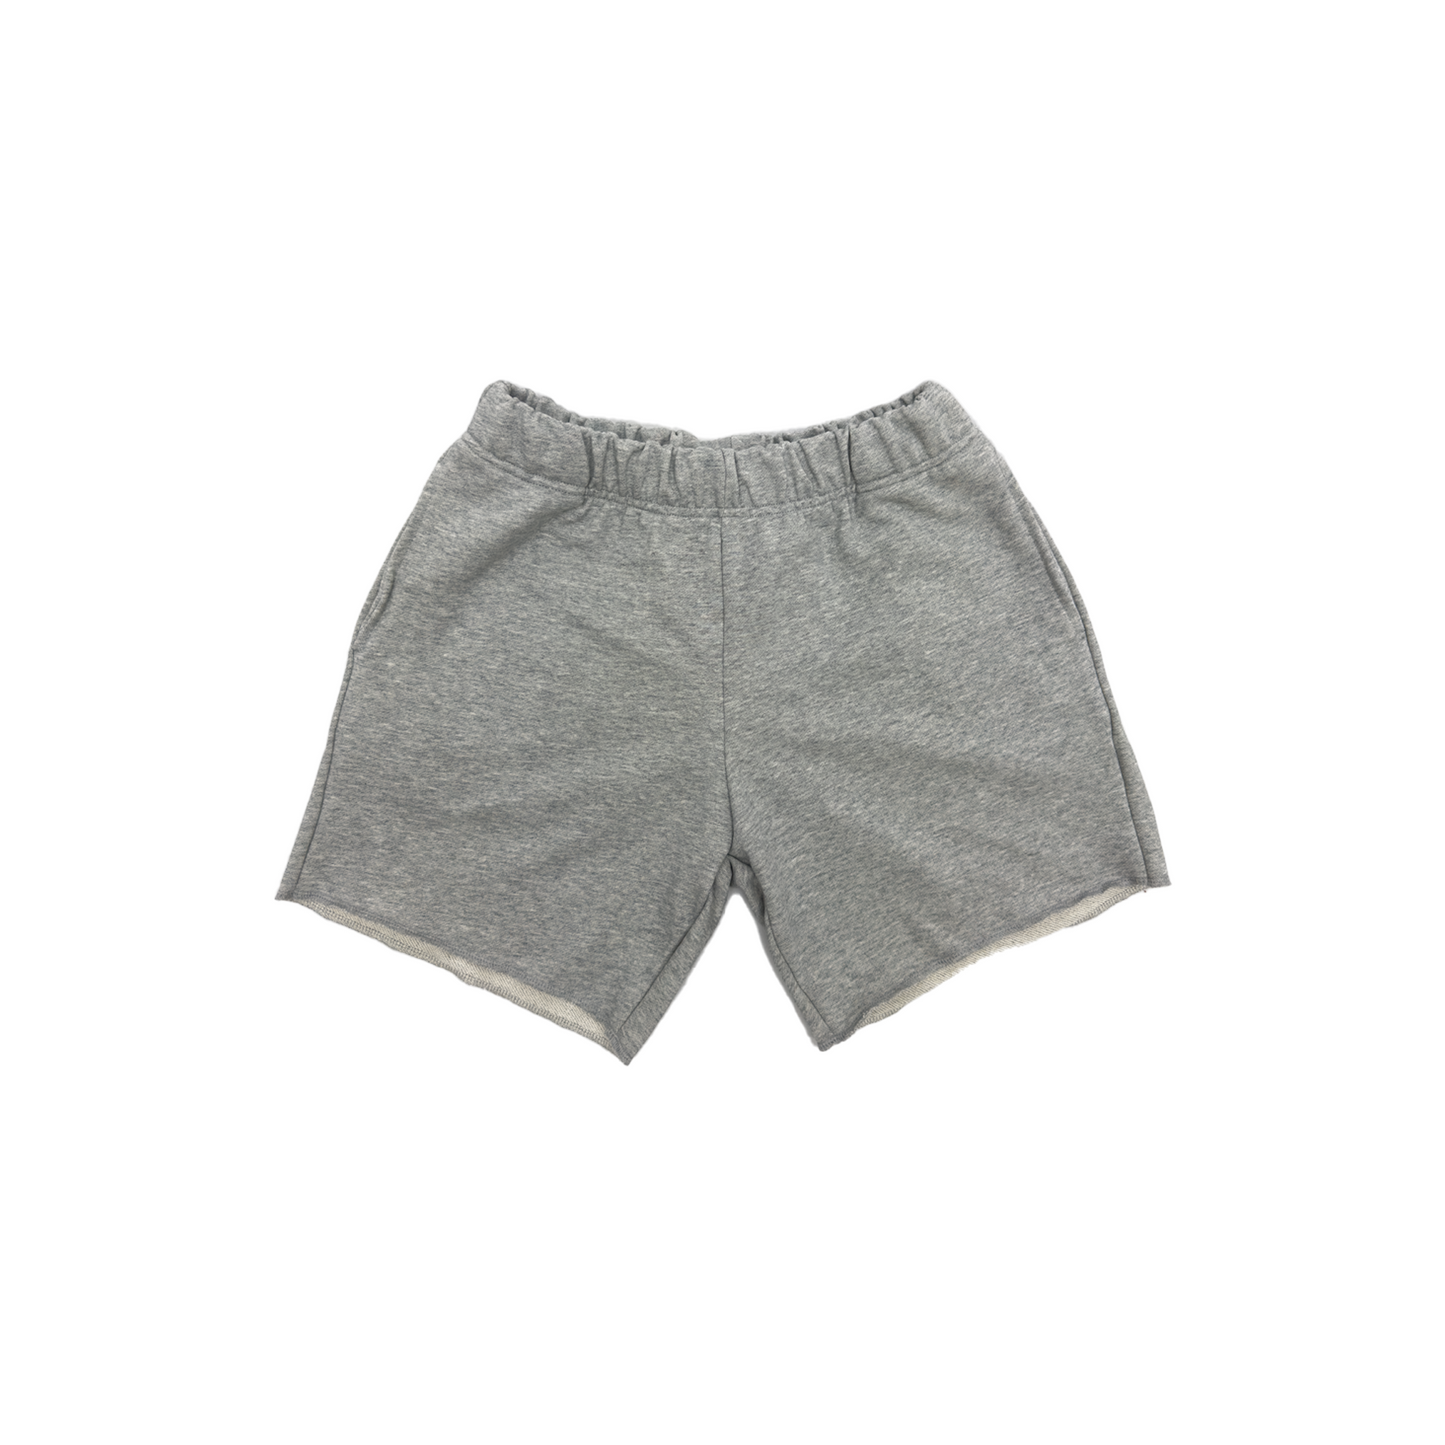 500 GSM 'Heather Grey' French Terry Cotton Sweat Shorts